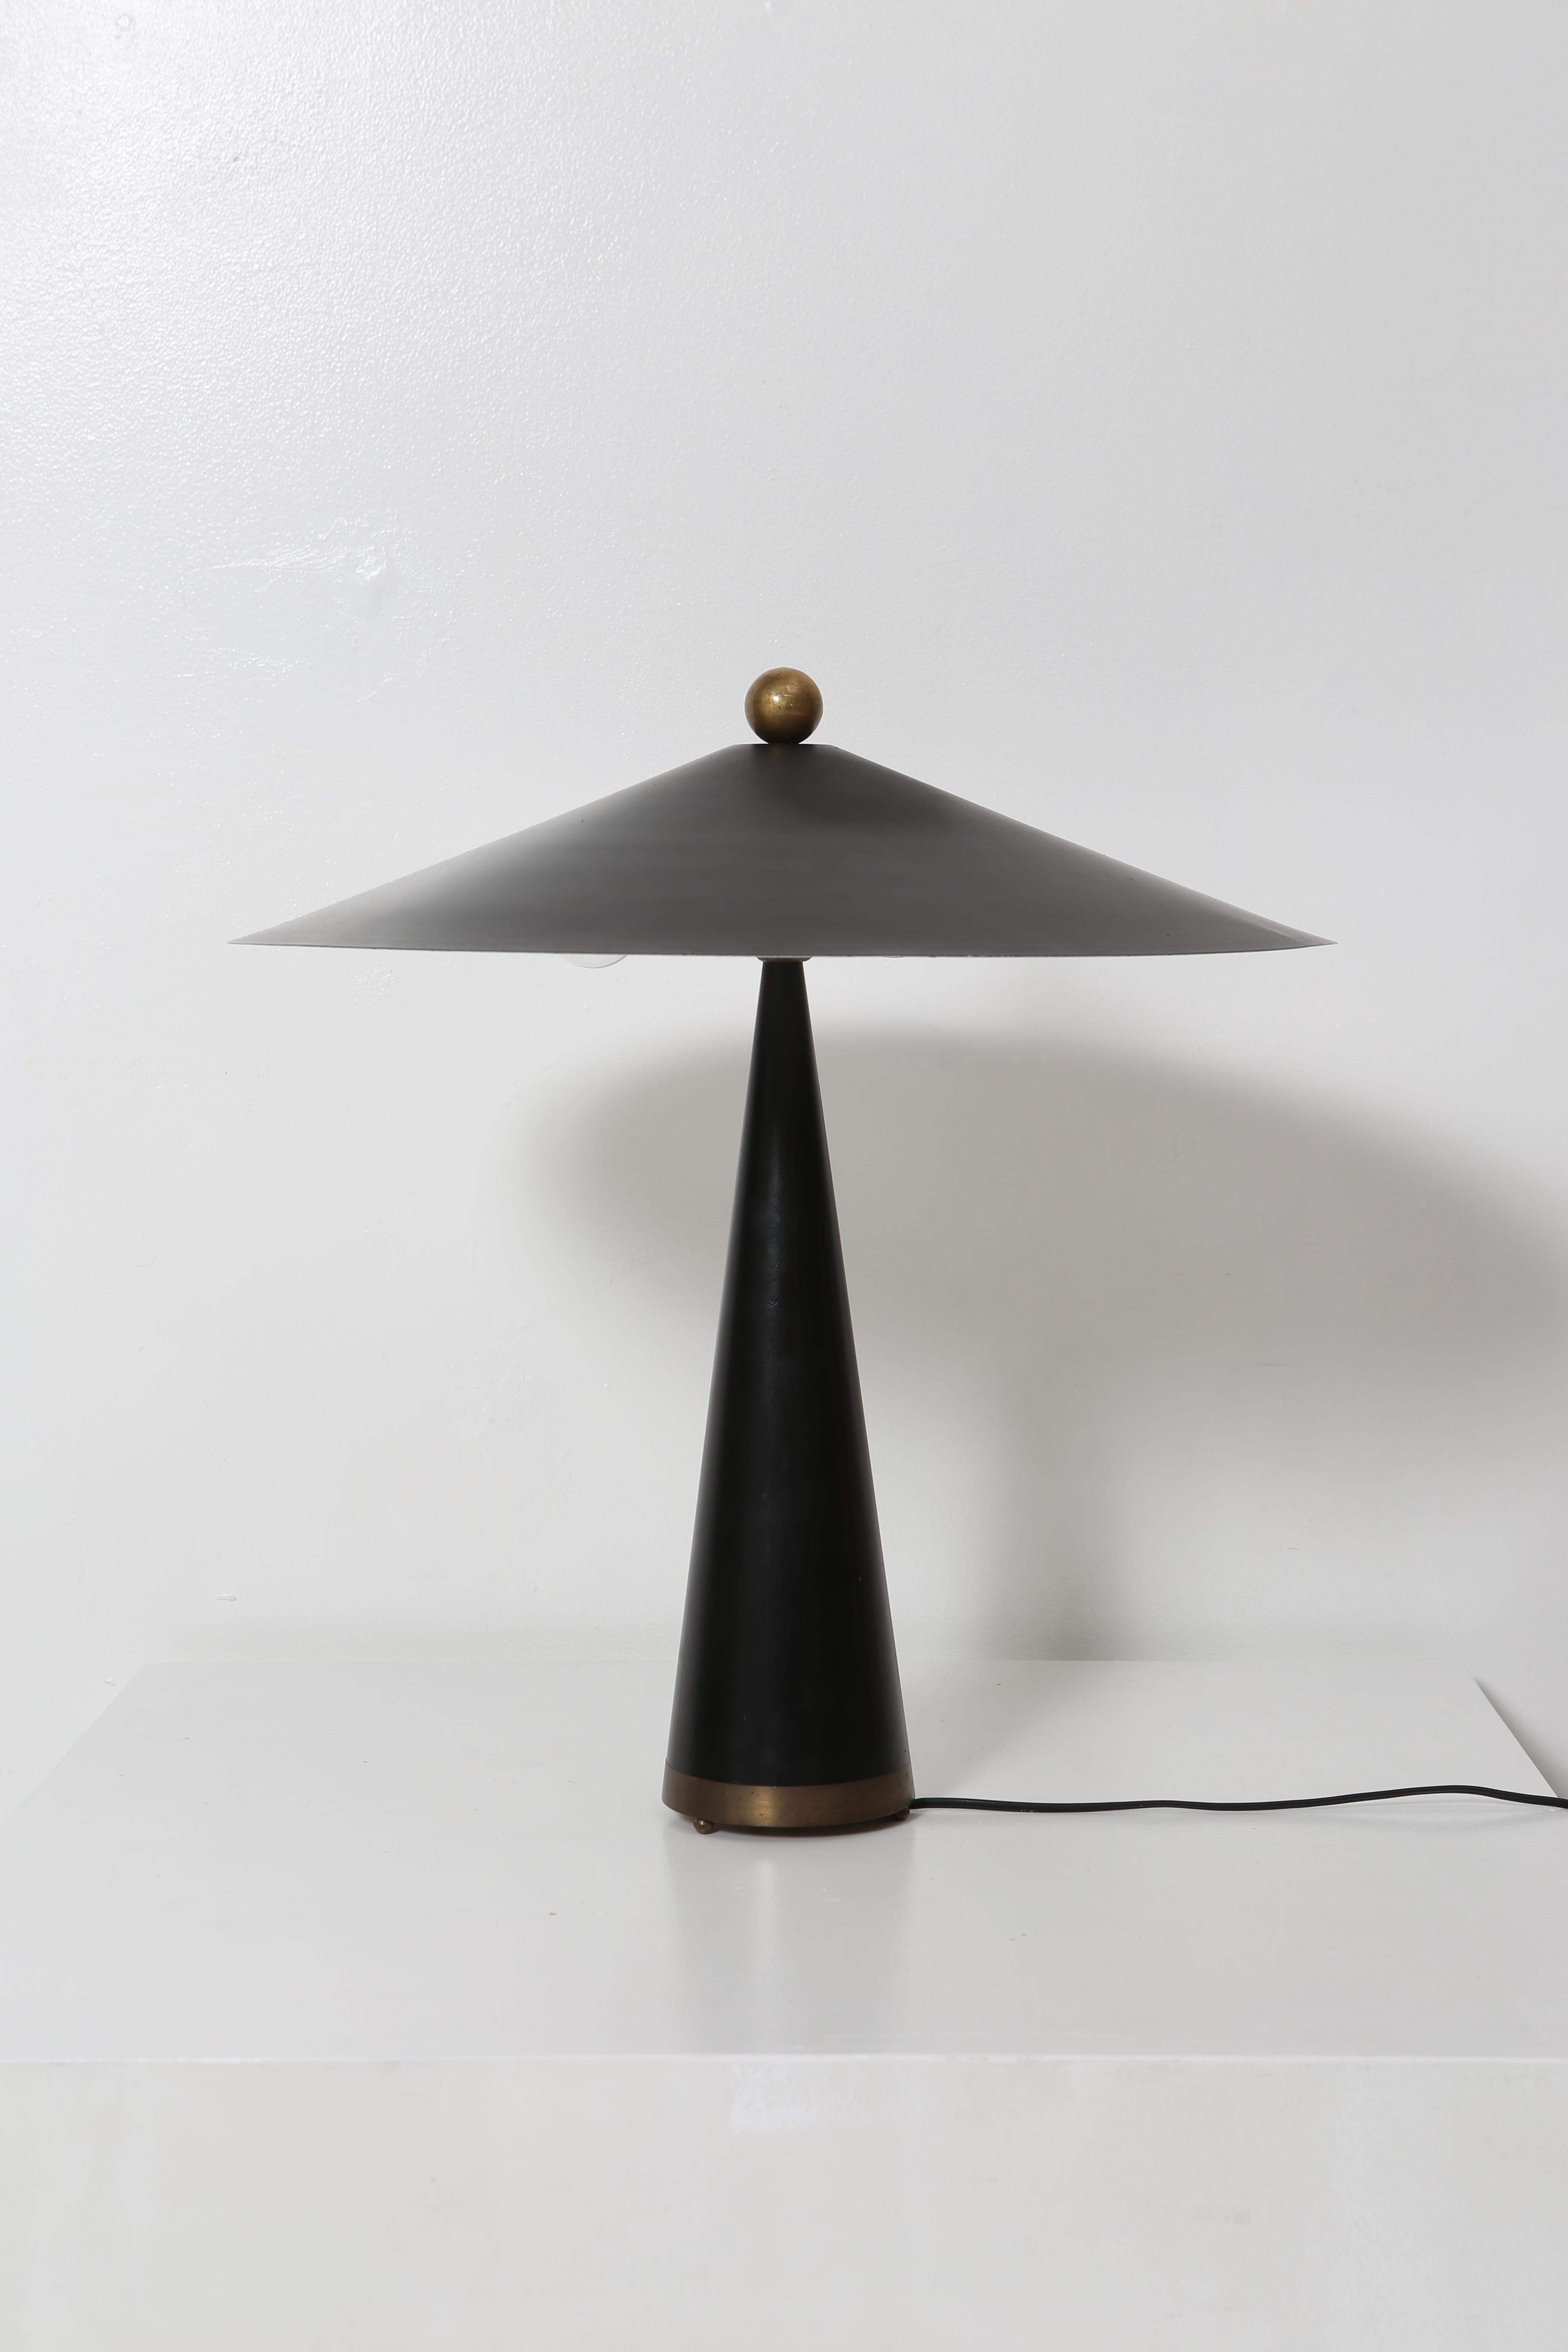 Late 20th Century Post-Modern Leather and Brass Studio-Made Lamp